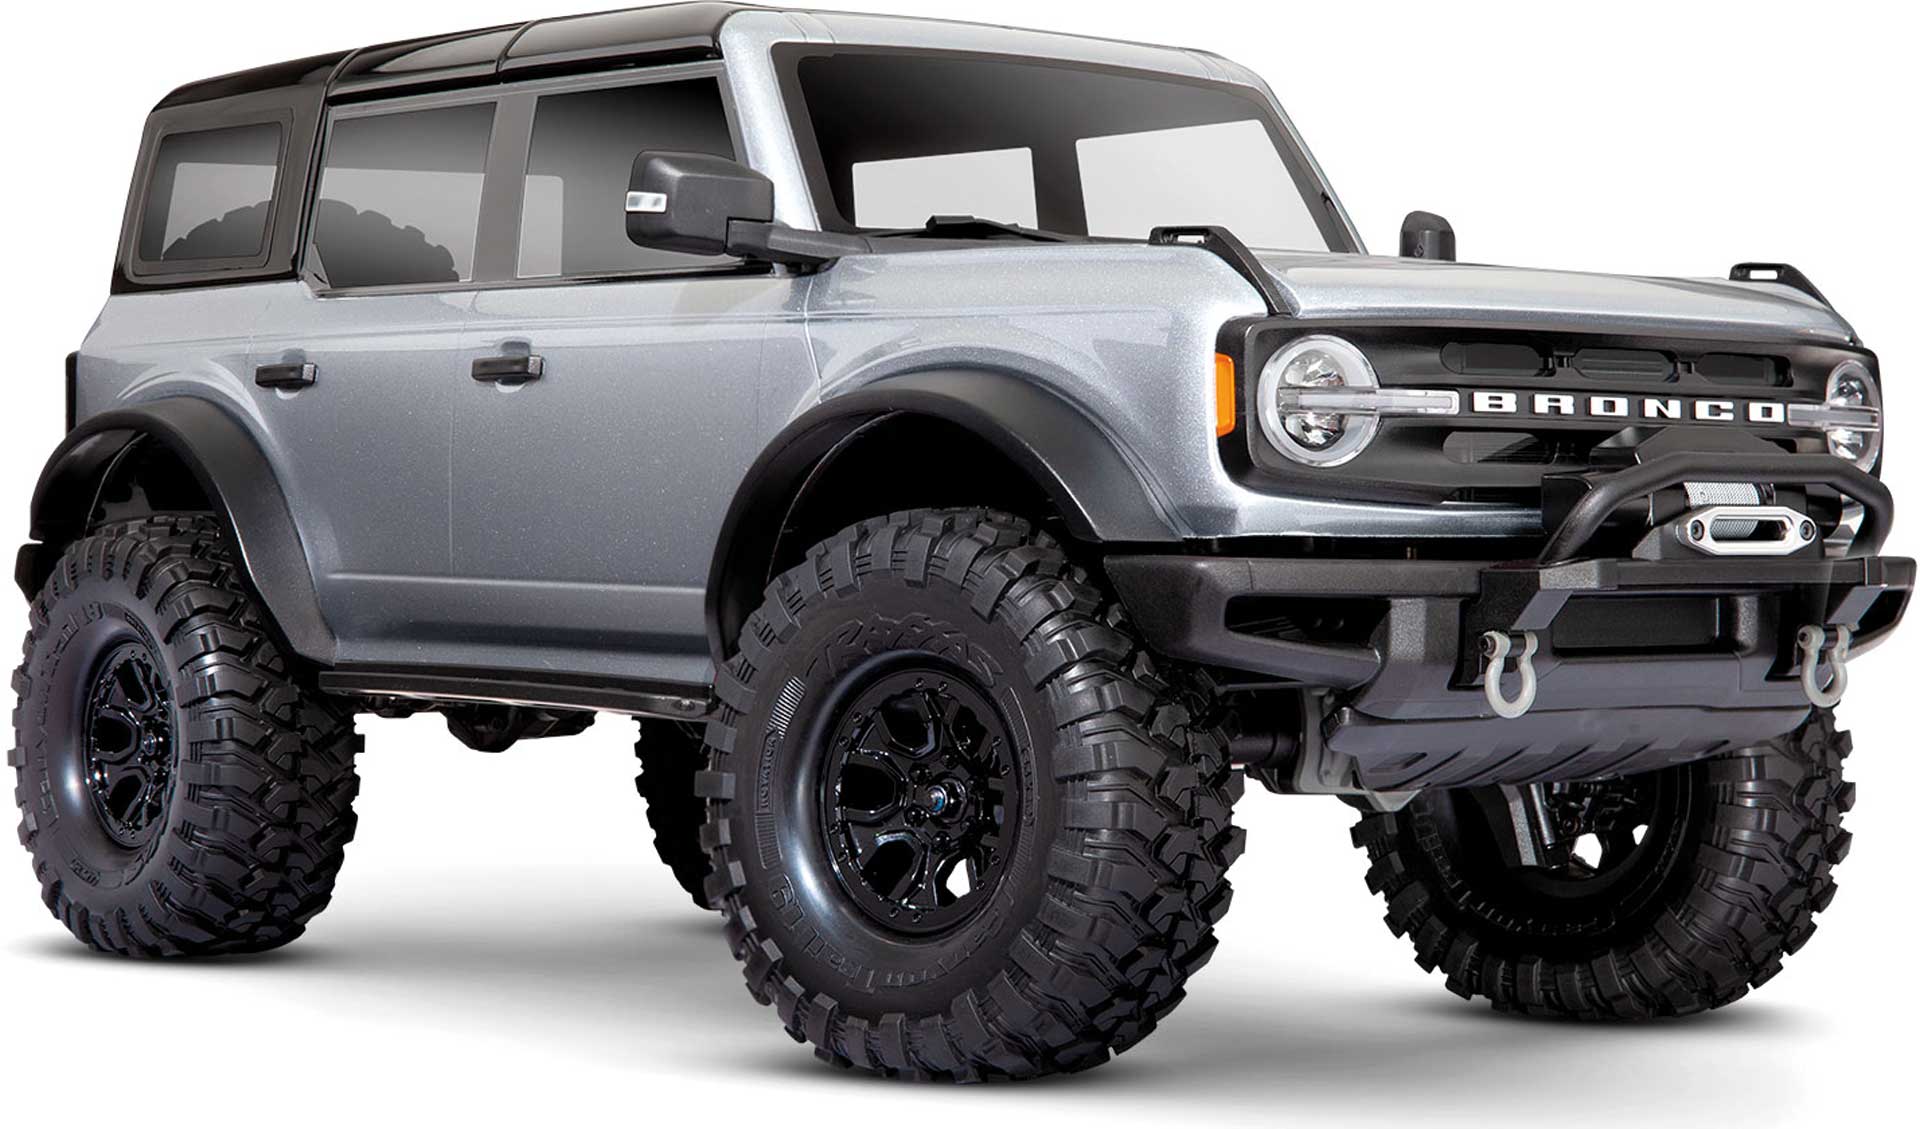 TRAXXAS TRX-4 2021 FORD BRONCO argent RTR Sans Accu /Chargeur 1/10 4WD SCALE-CRAWLER BRUSHED